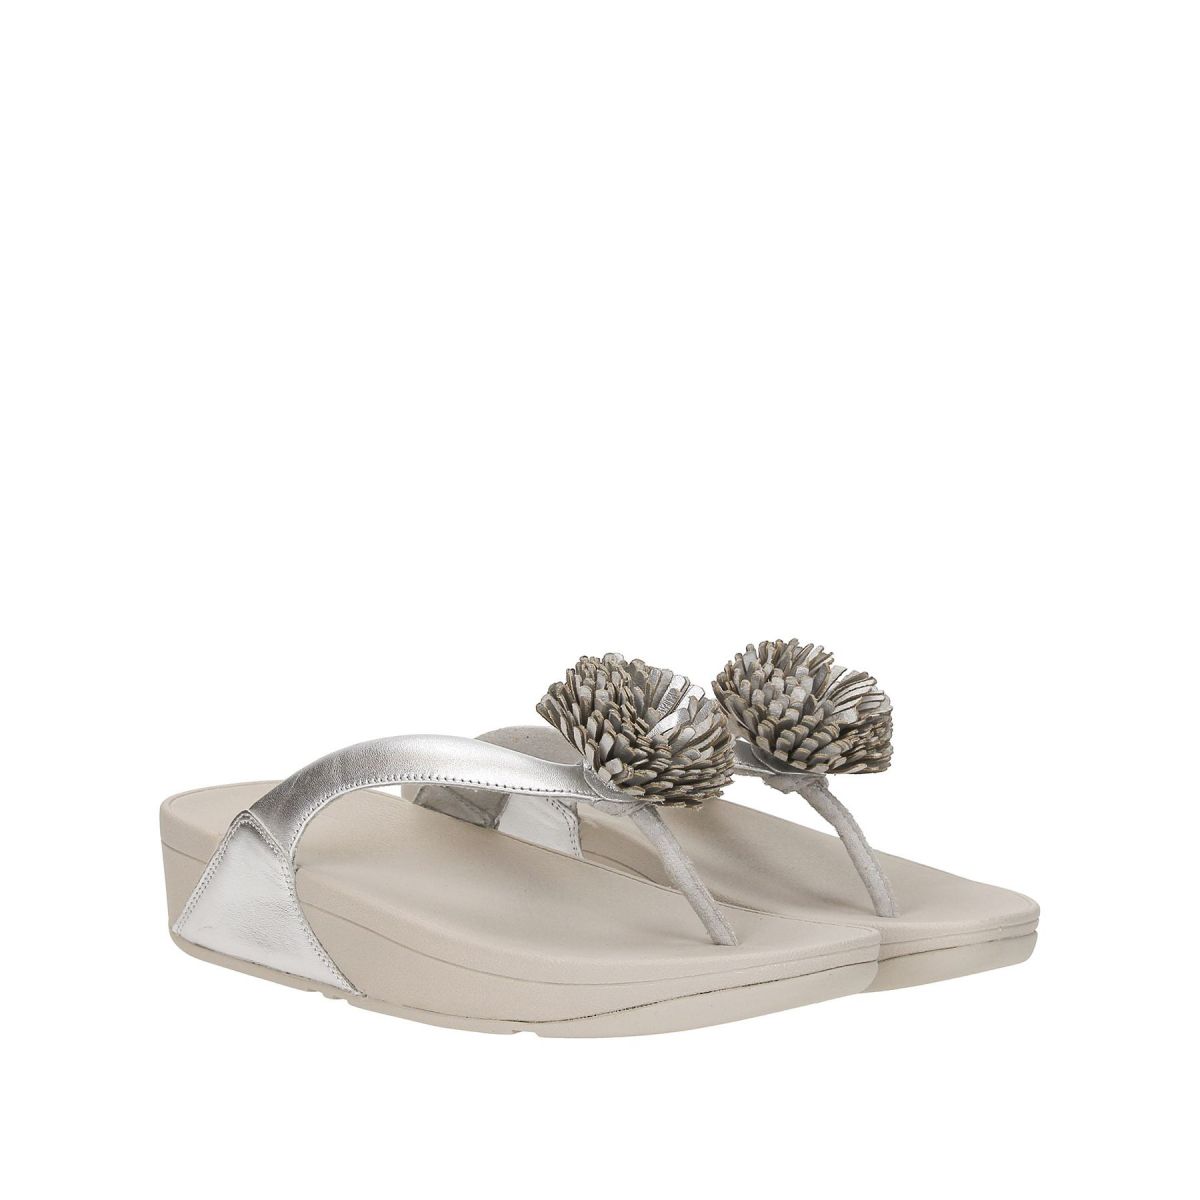 FitFlop Ciabatte Flowerball Argento B51-011F-ARGENTO-017